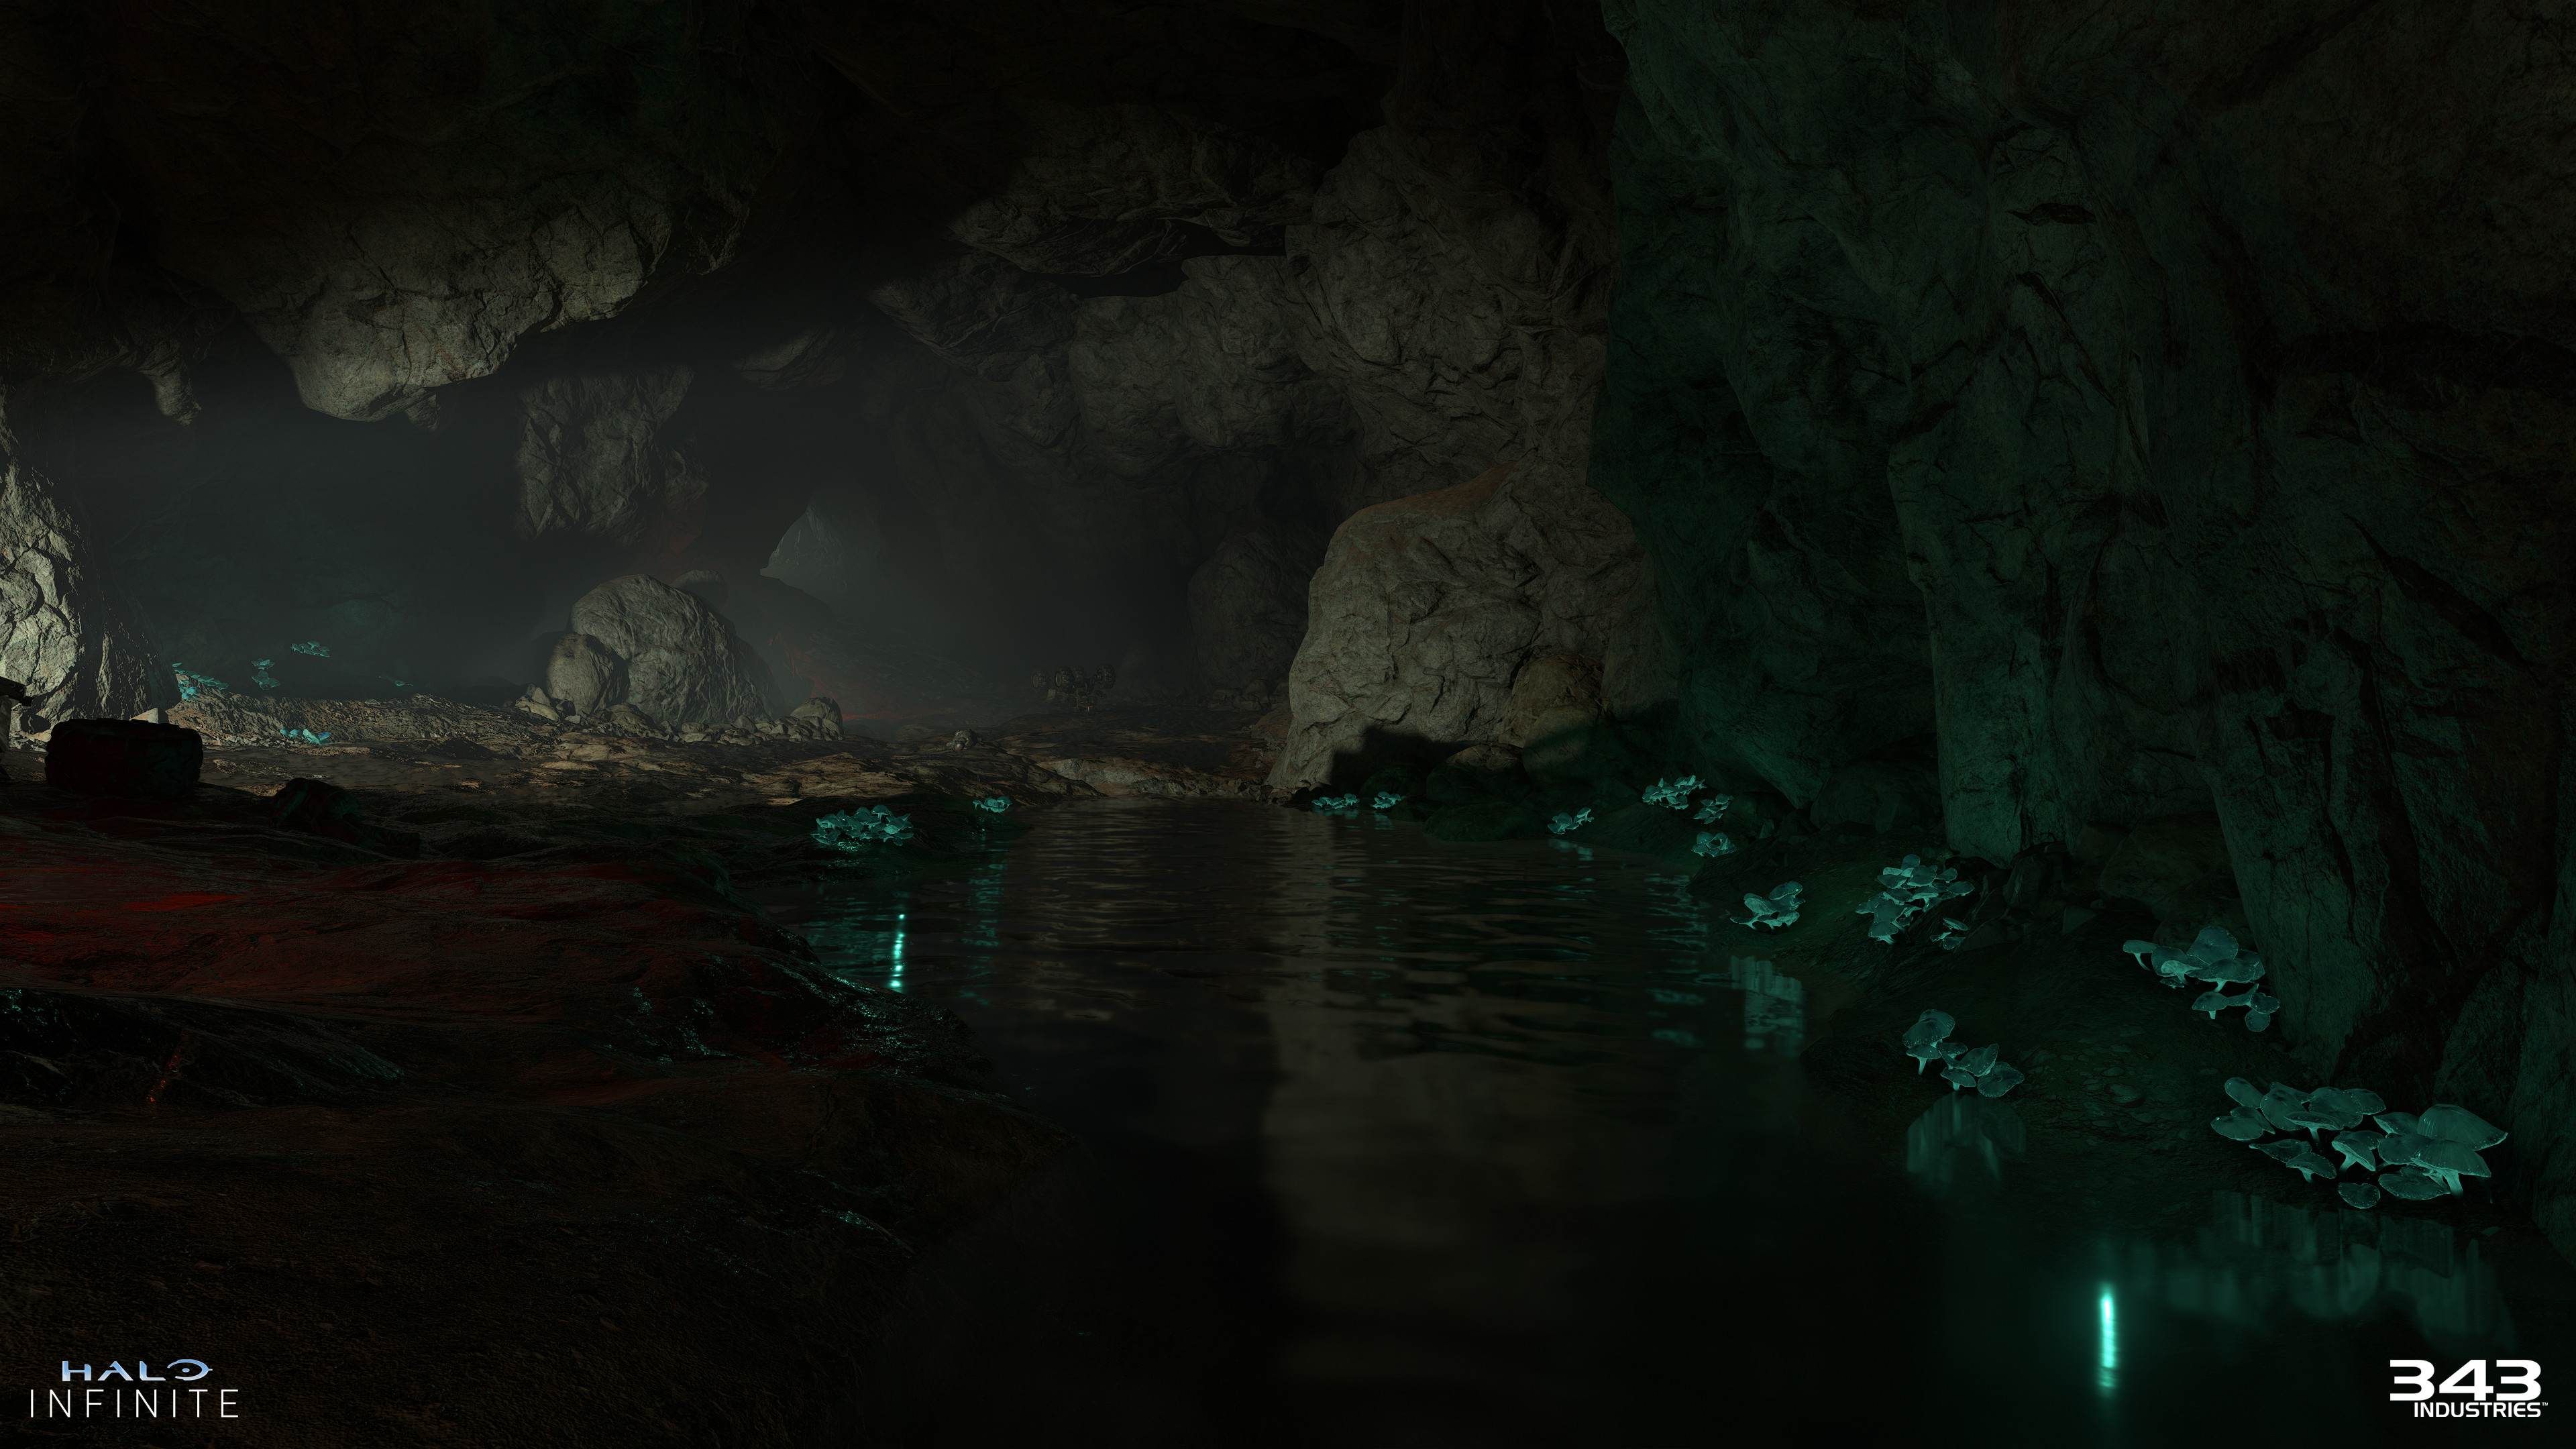 The glowing mushrooms allowed me to play with the gradients on the walls in these larger rooms of the caves.